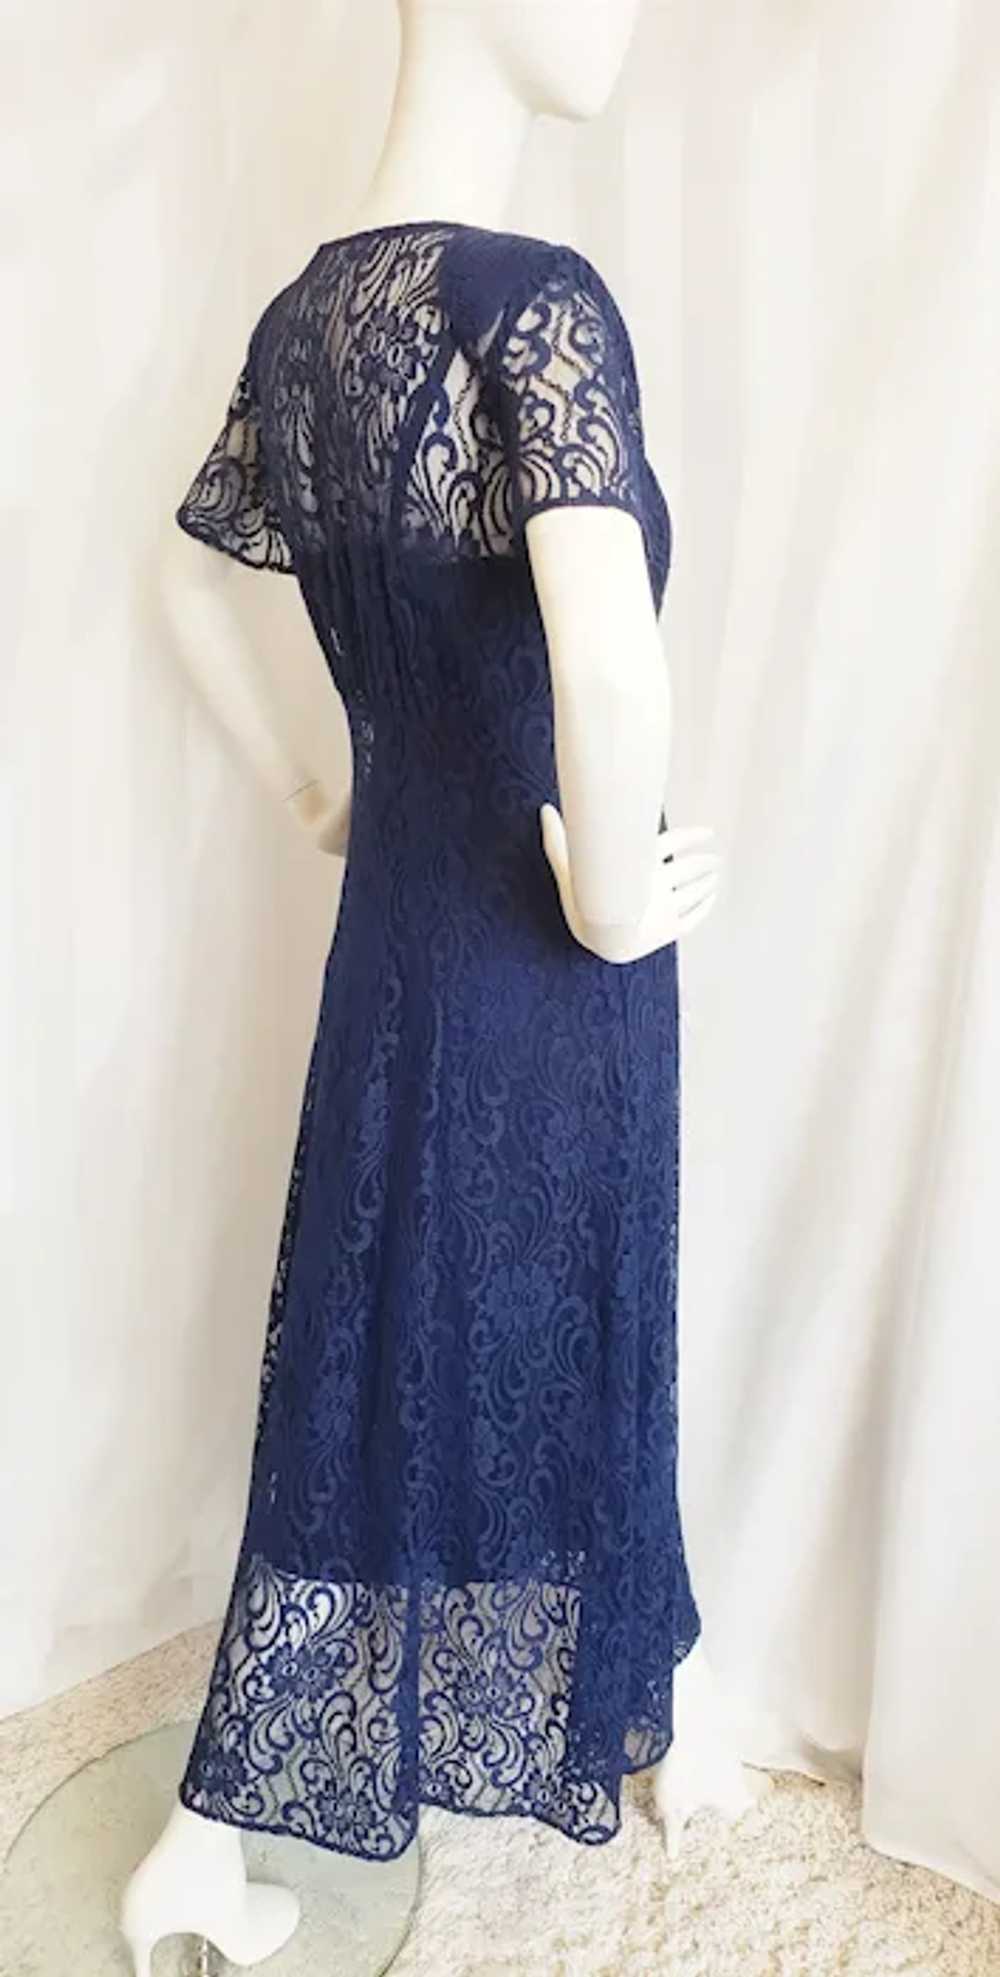 Romantic Lovely Lace Maxi Dress - image 2